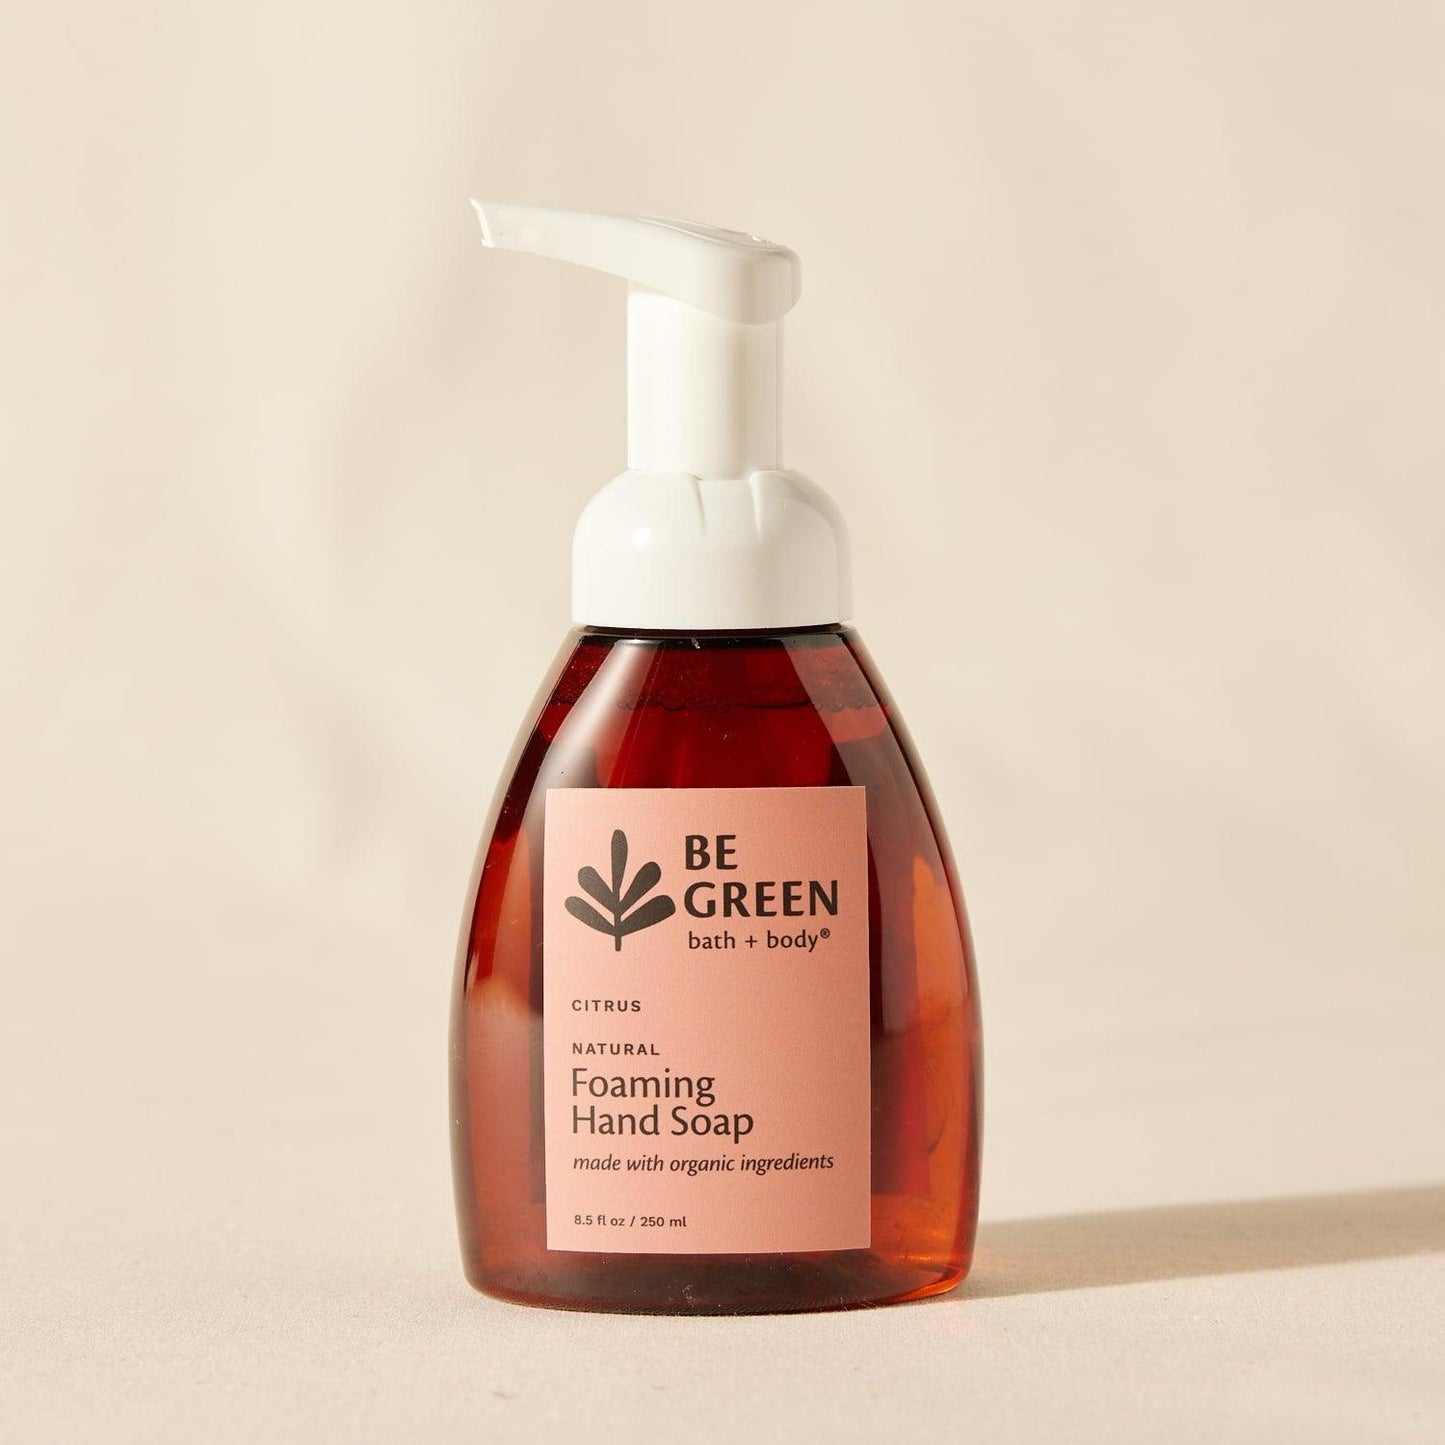 Natural foaming hand soap without triclosan EWG Verified